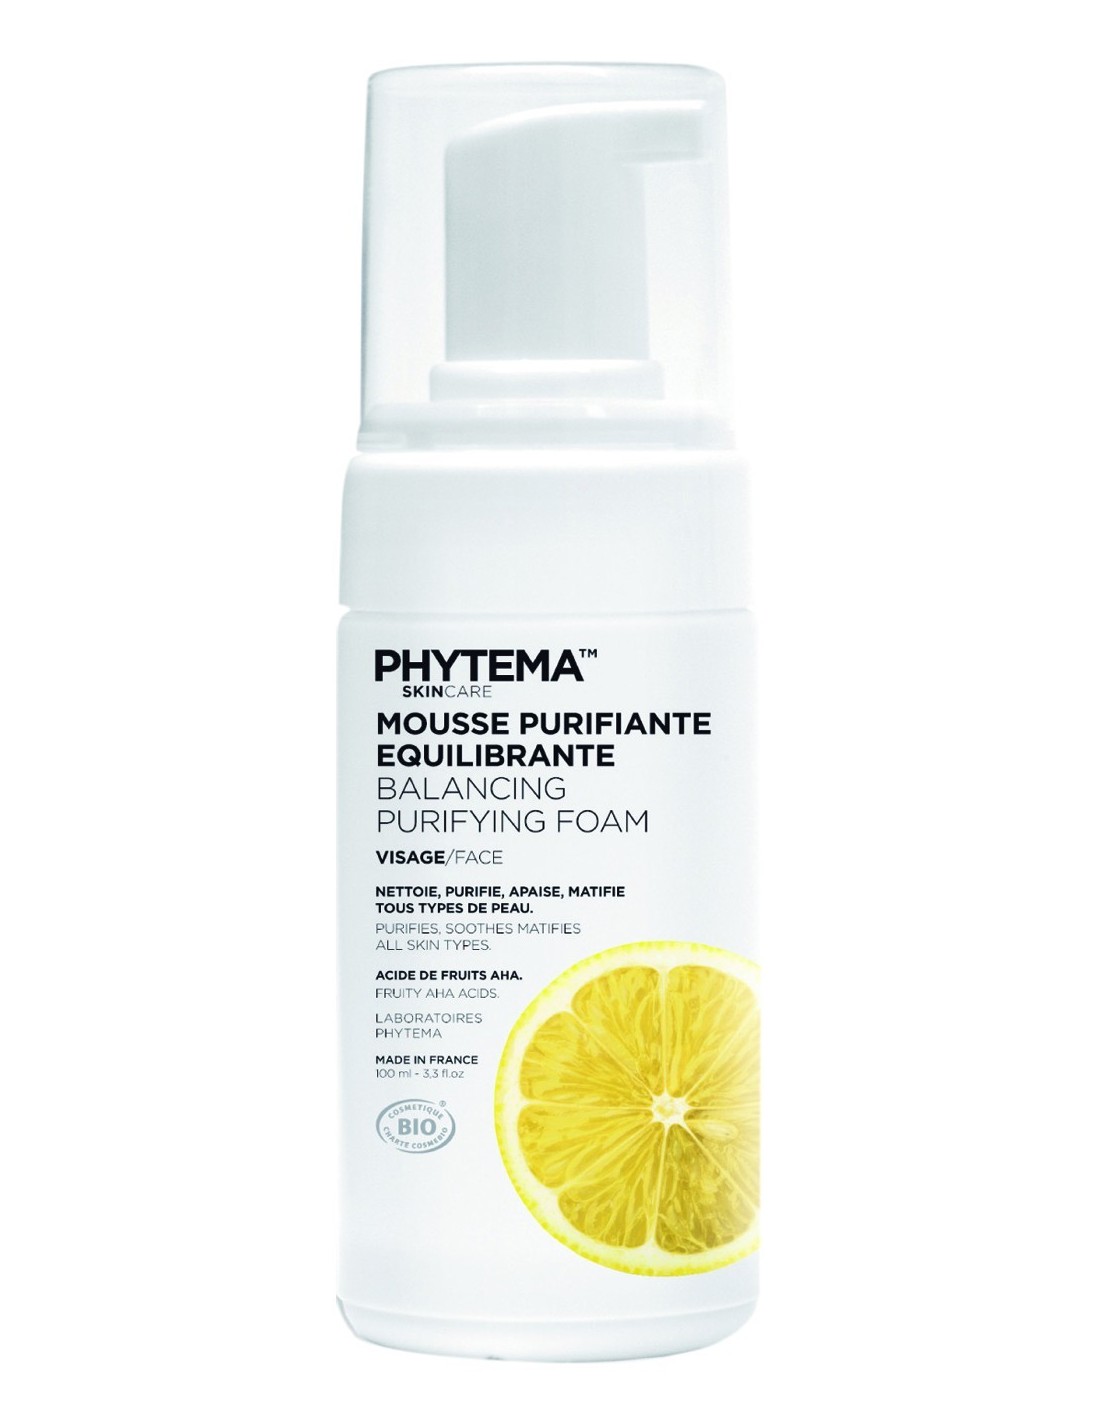 Purifying cleanser foam. Balance Cleansing Mousse. The Skin мусс. Facial Foaming and Soft peeling.